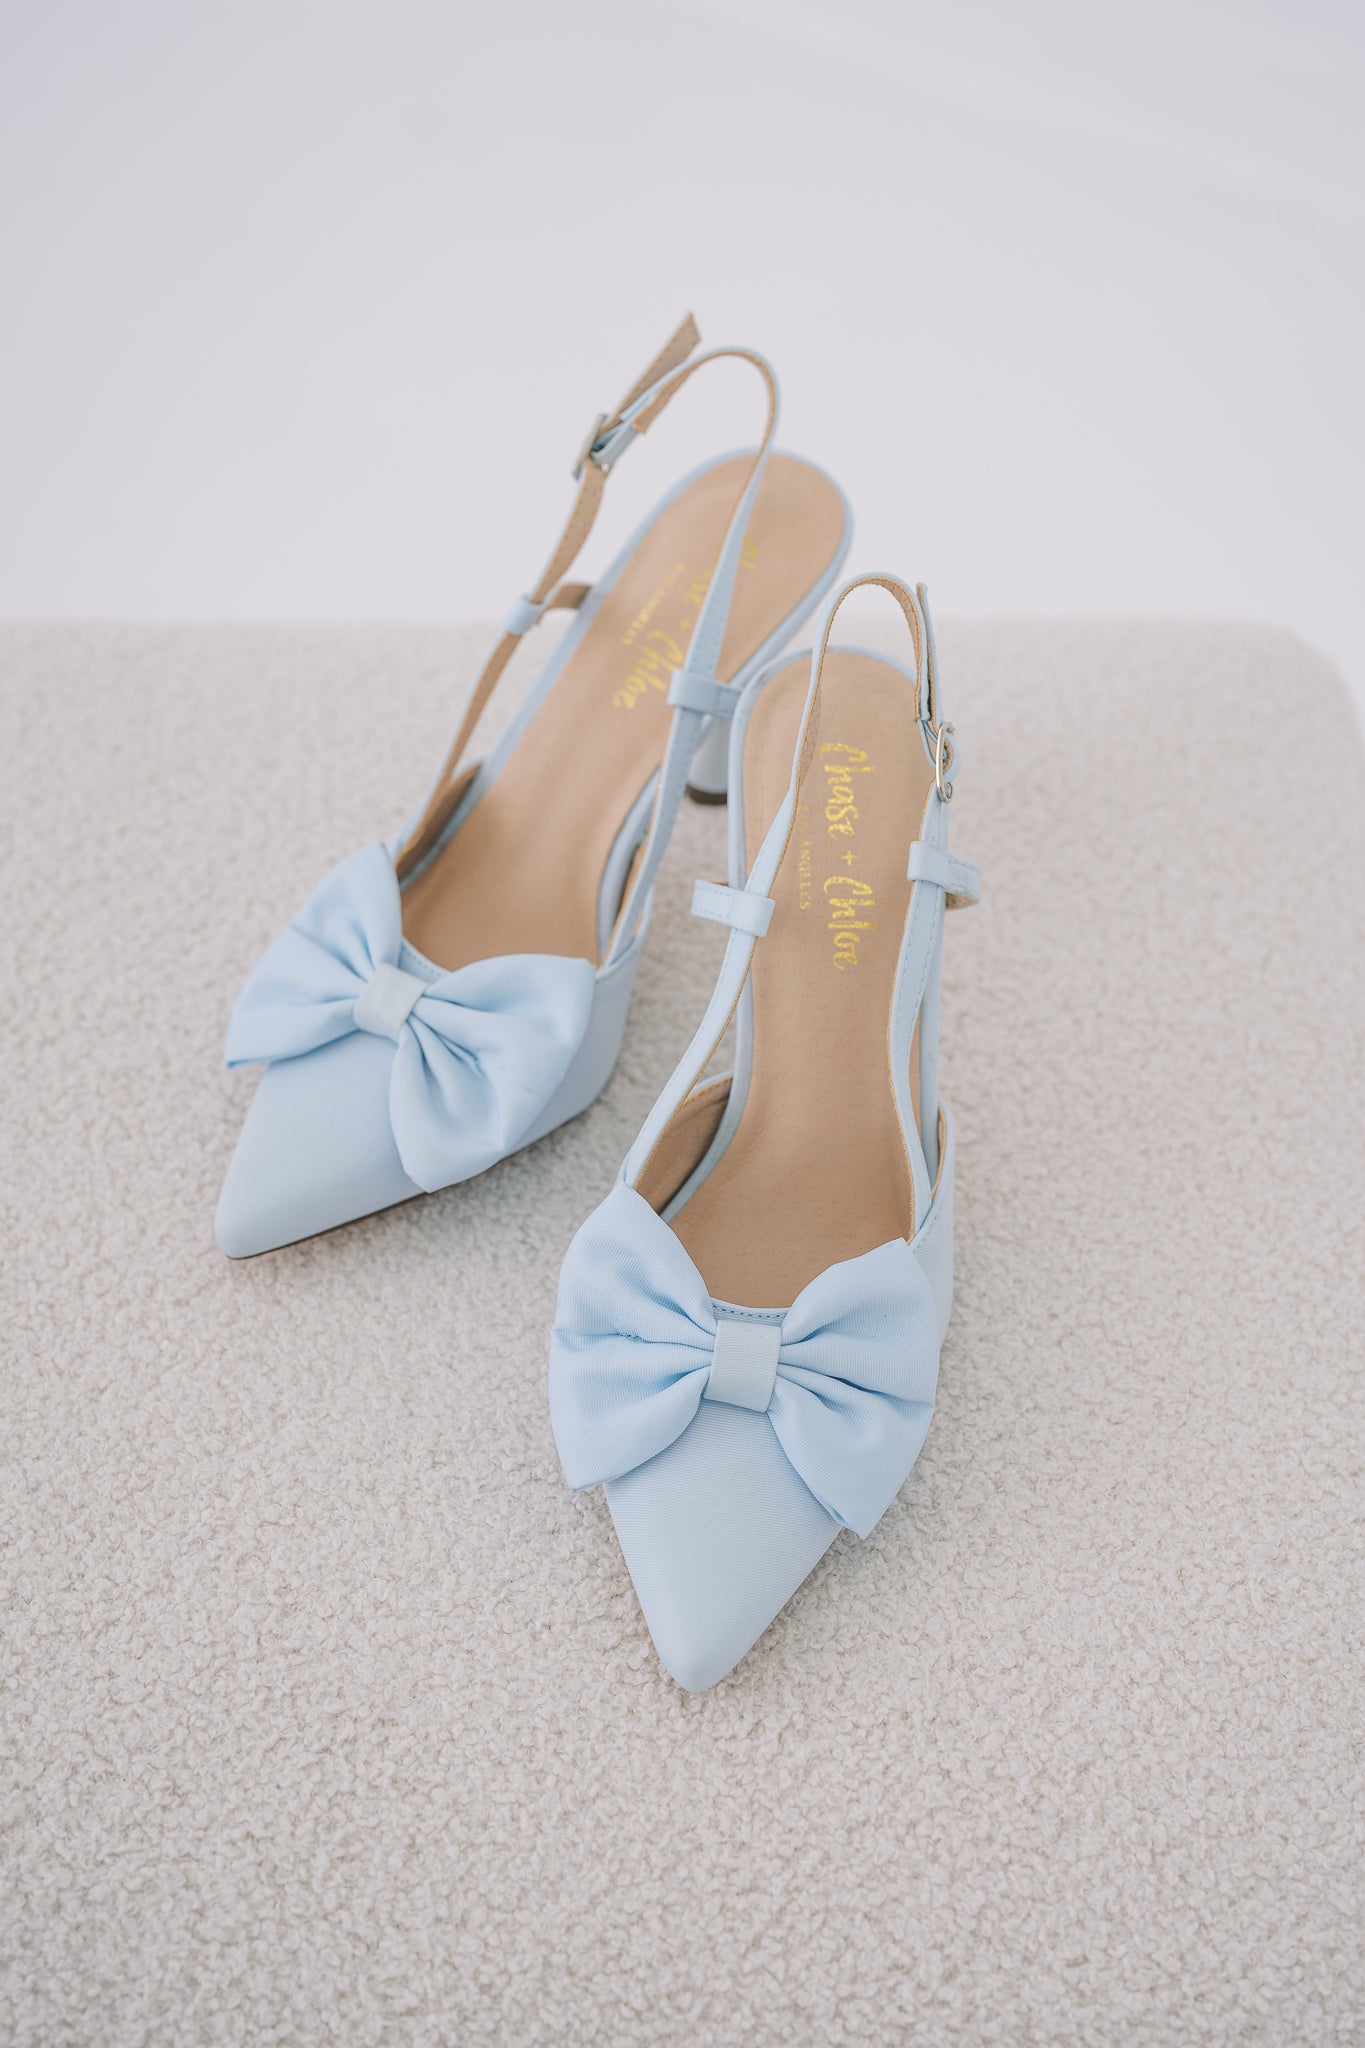 Blue Wedding Sandals With Low Block Heels and Ankle Strap, Handmade Bridal  Shoes With Closed Pointed Toe,something Blue Heels - Etsy | Bridal shoes,  Kitten heel wedding sandals, Blue bridal shoes